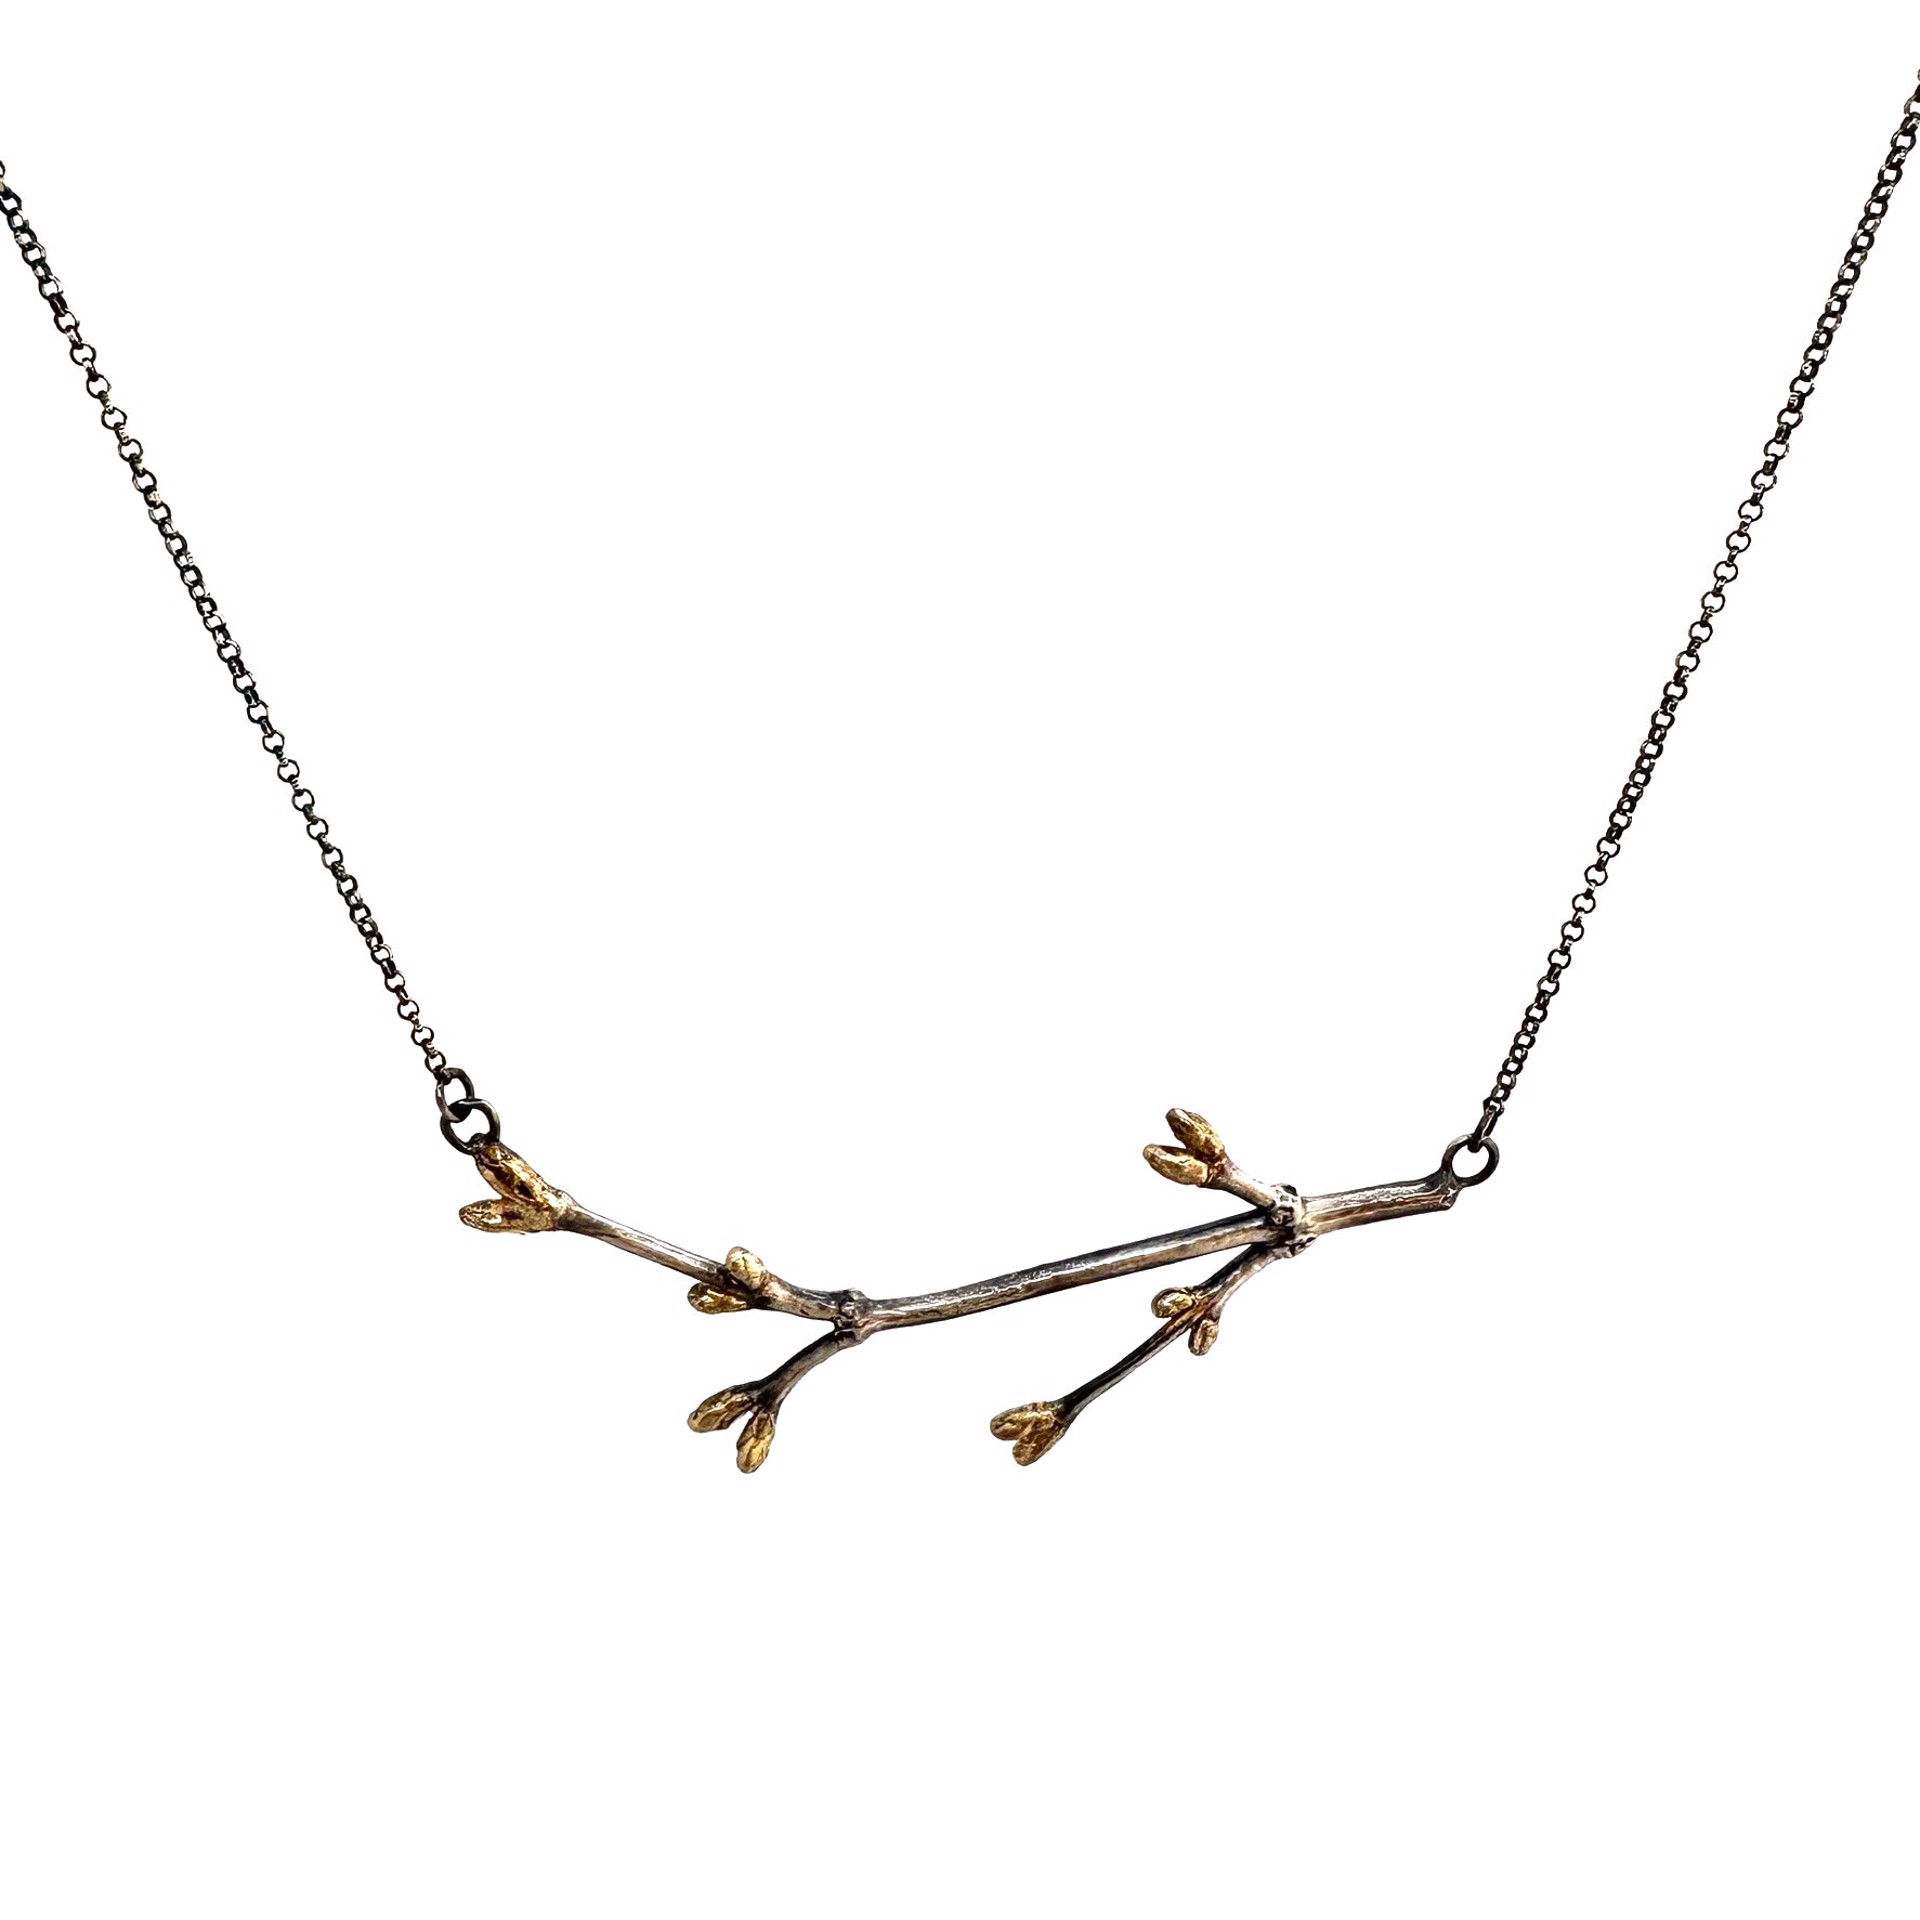 Maple Necklace w/ 24k Gold by Sara Thompson